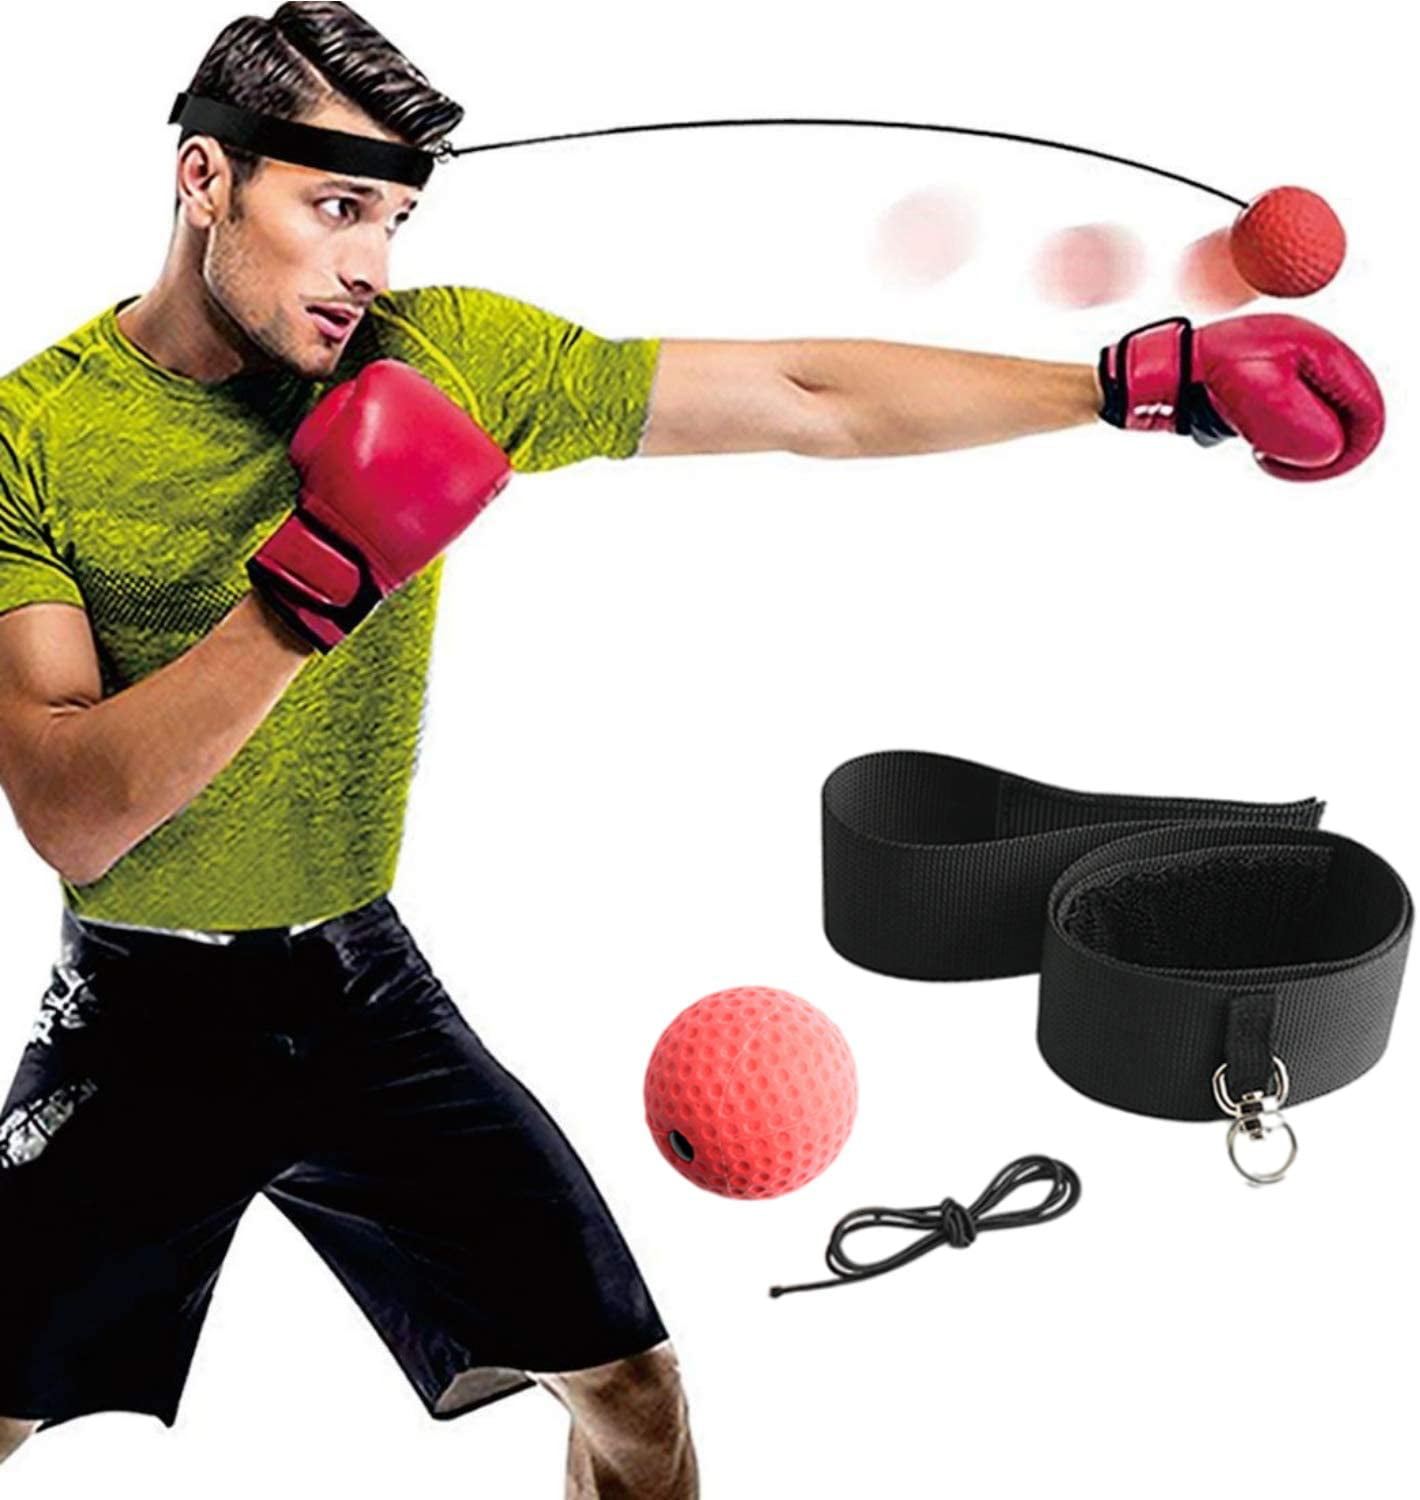 Boxing Reflex Ball Train At Home Equipment Gym Exercise Fight Bundle New Fun MMA 